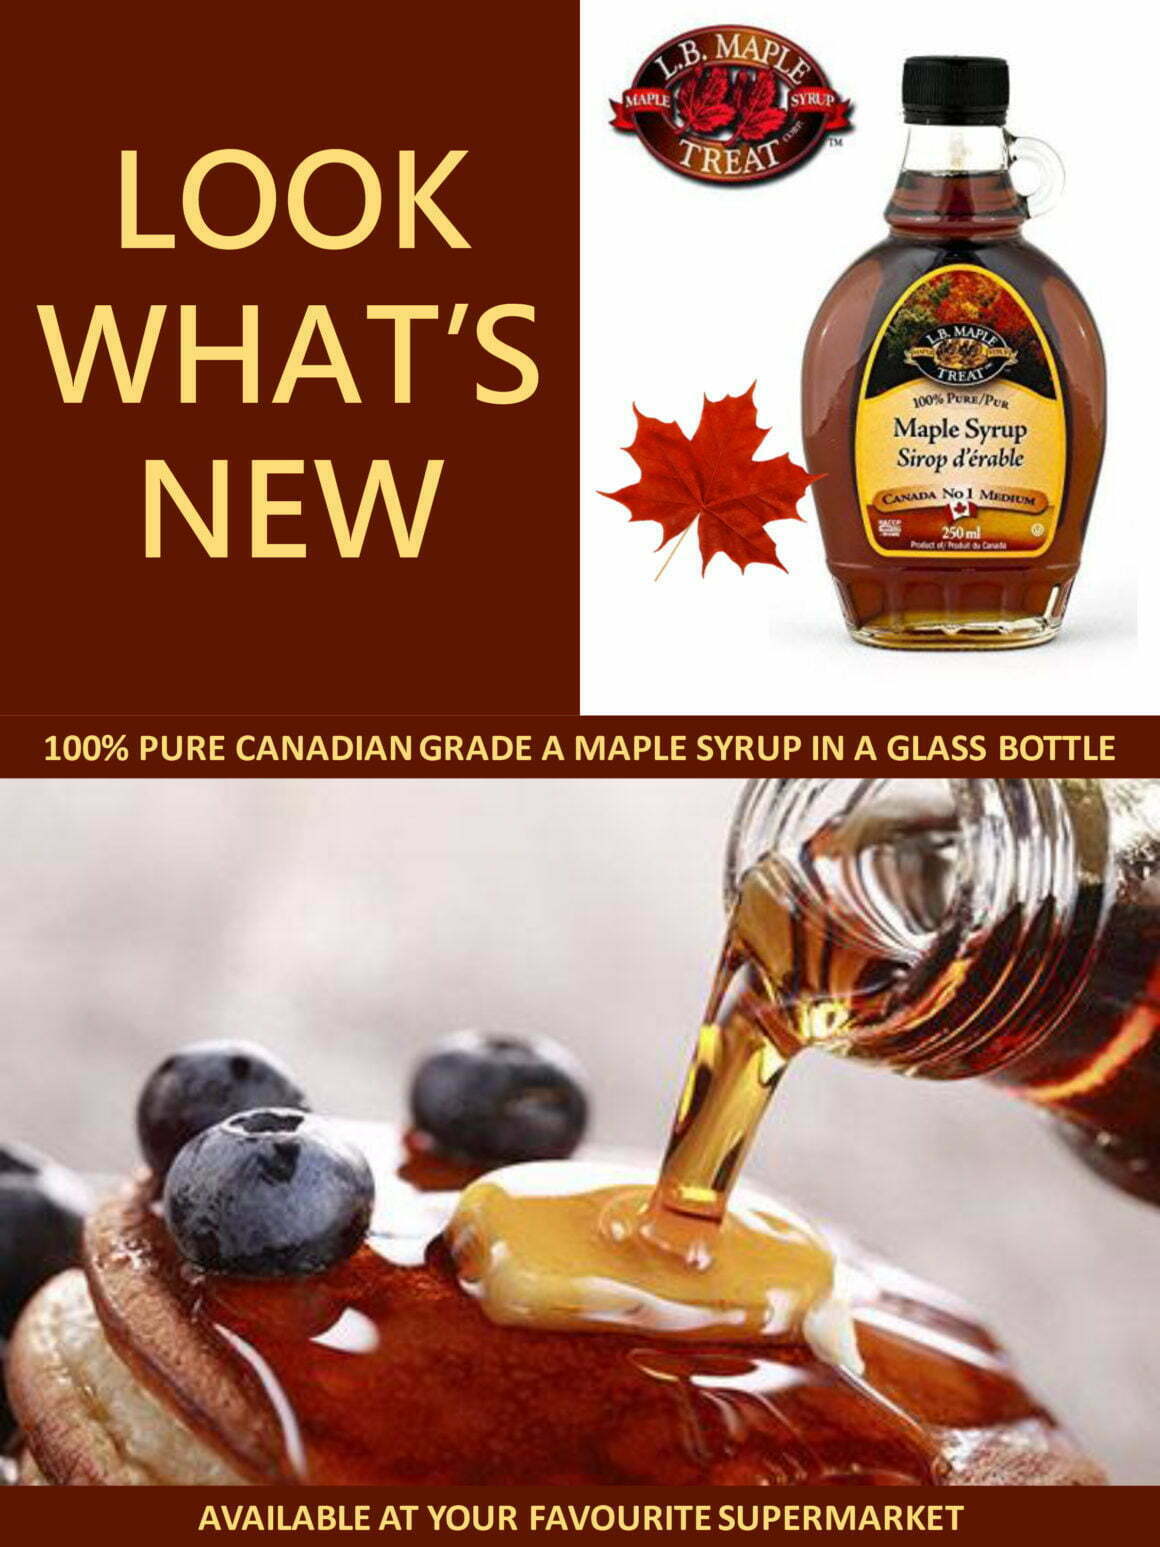 New 100% Maple Syrup